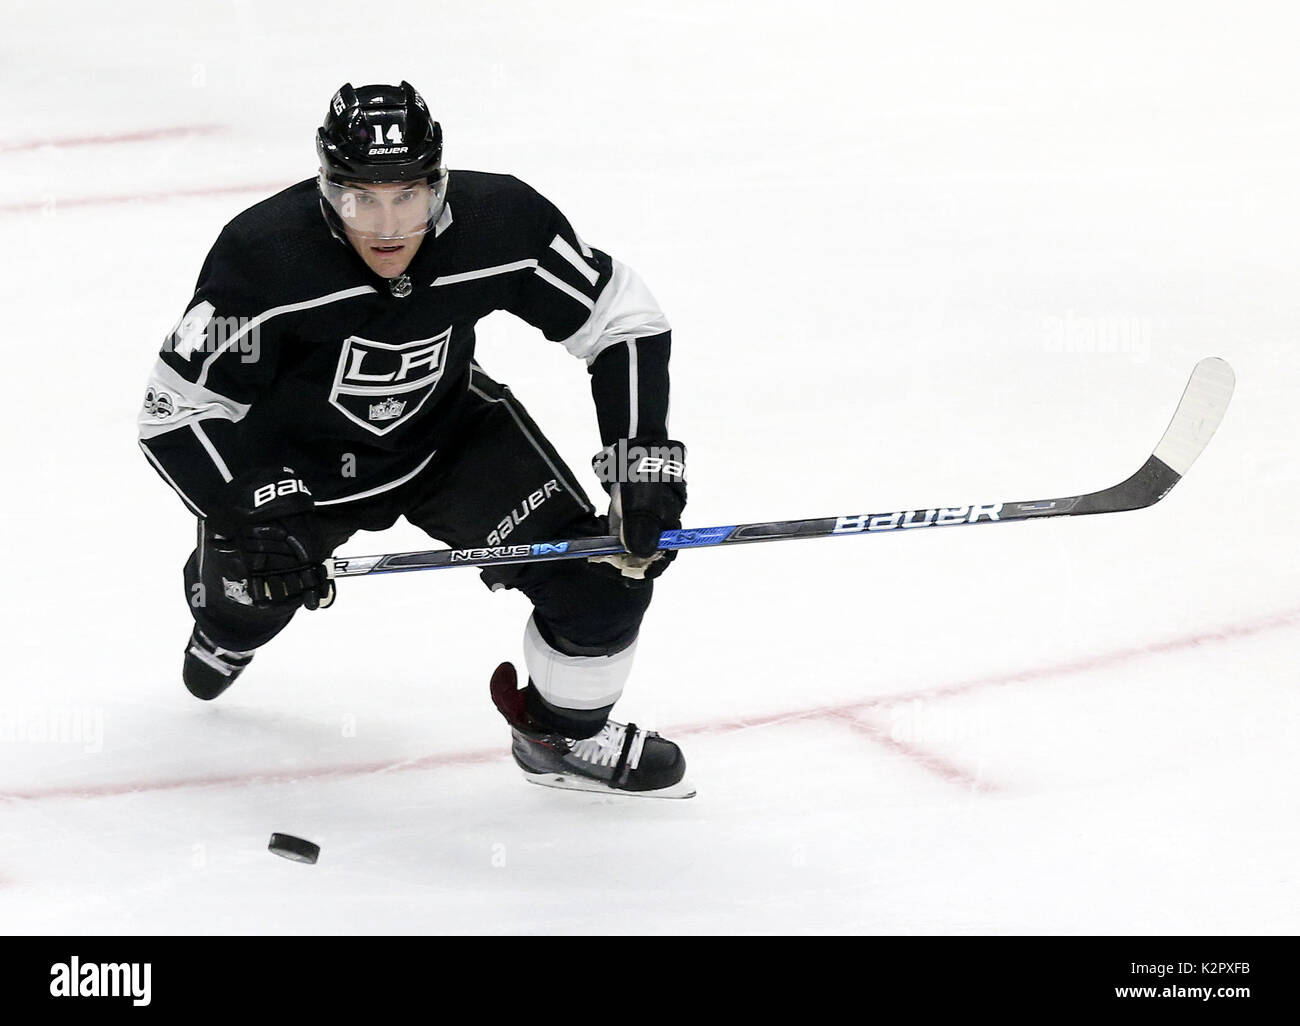 Los Angeles, California, USA. 9th Nov, 2017. Los Angeles Kings forward Michael Cammalleri (14) dives for the puck during a 2017-2018 NHL hockey game against Tampa Bay Lightning in Los Angeles on November 9, 2017. Tampa Bay Lightning won 5-2 Credit: Ringo Chiu/ZUMA Wire/Alamy Live News Stock Photo